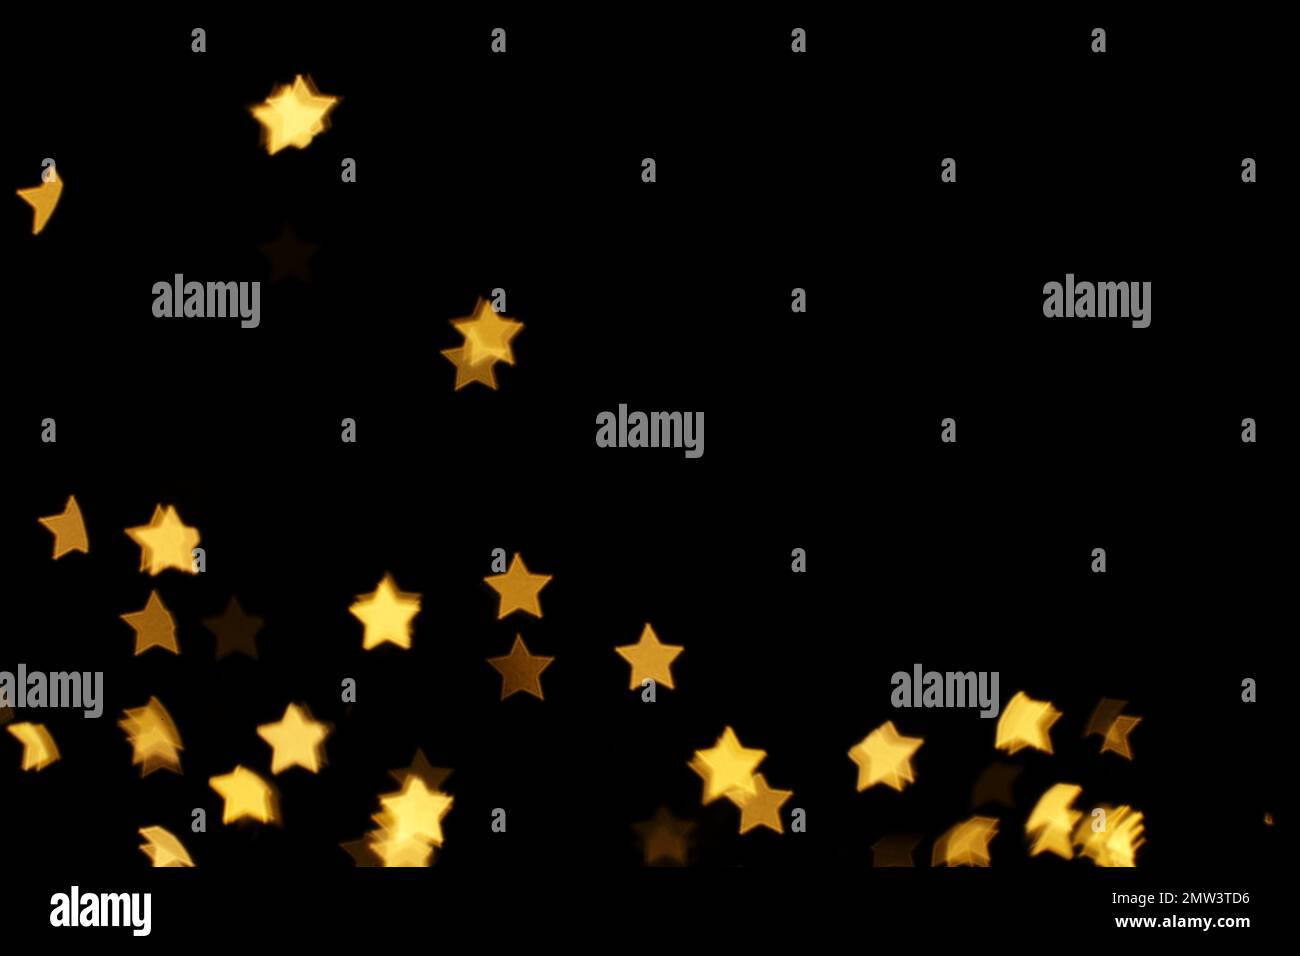 Blurred view of star shaped lights on black background. Bokeh effect Stock Photo